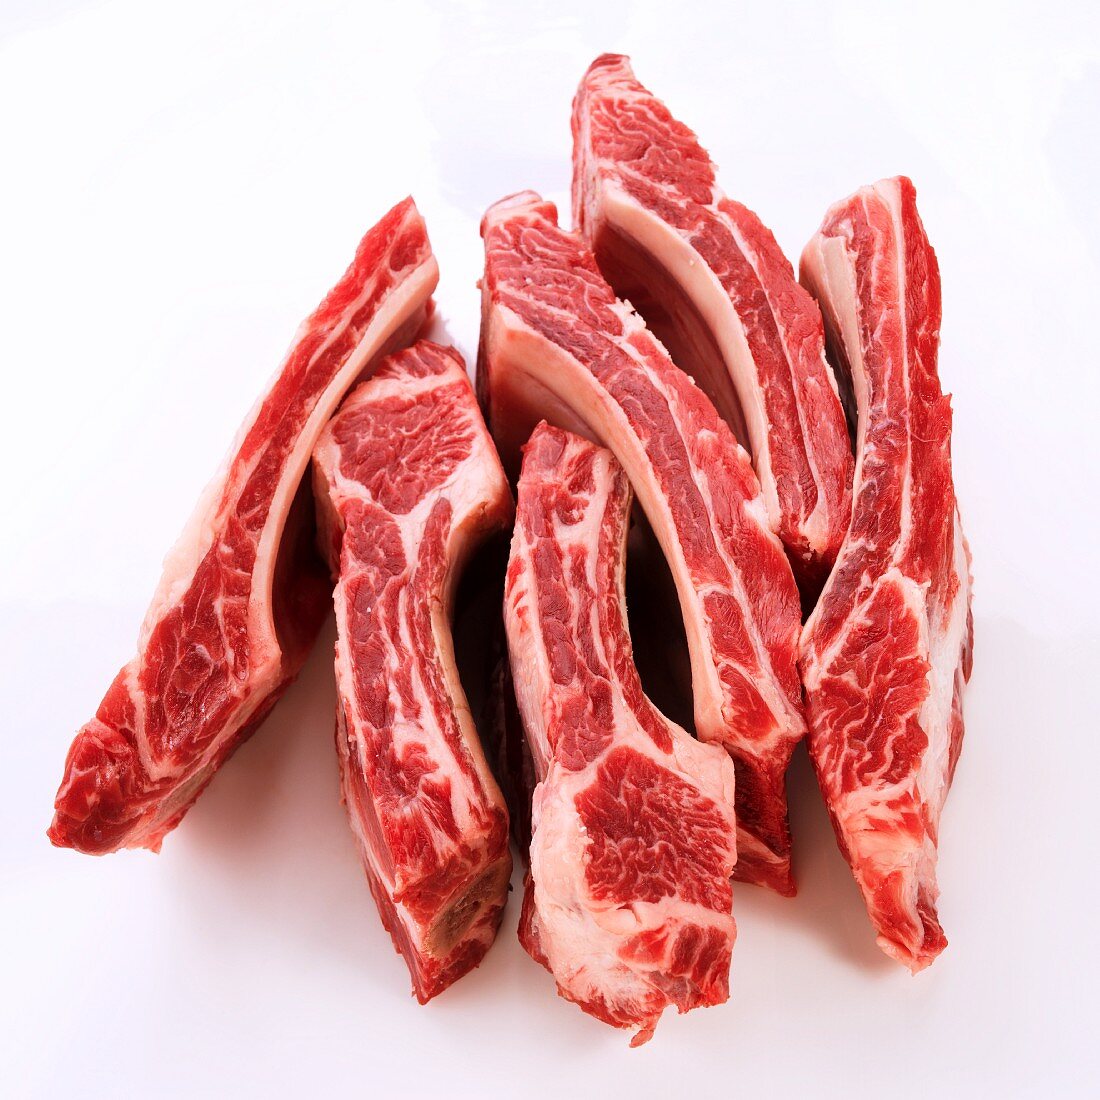 Raw Beef Ribs on a White Background